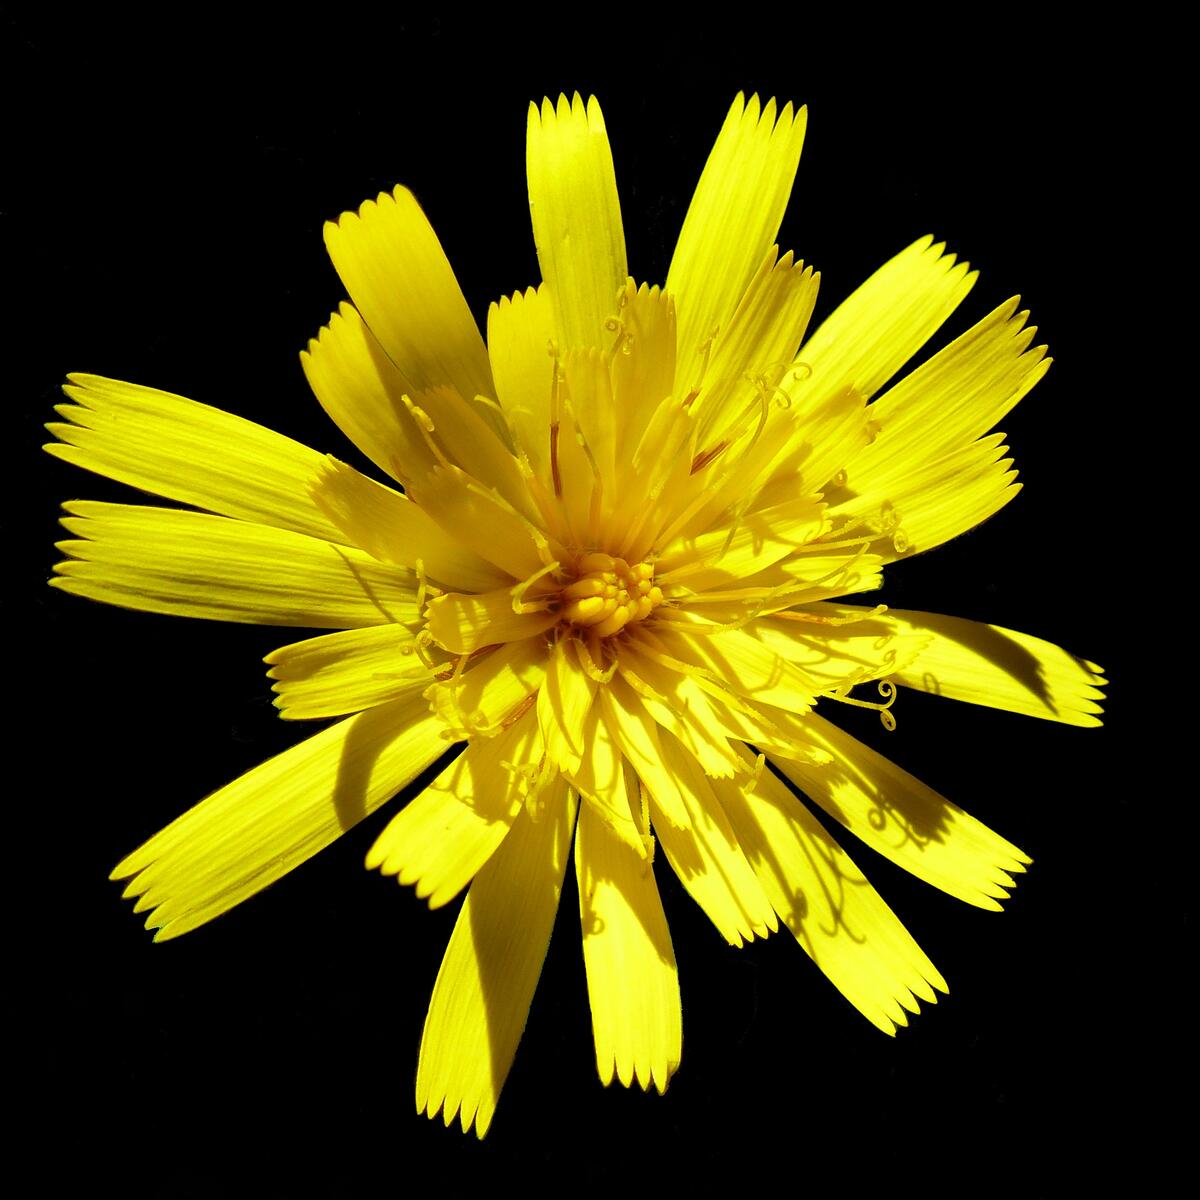 Yellow flower of the daisy family on a black background